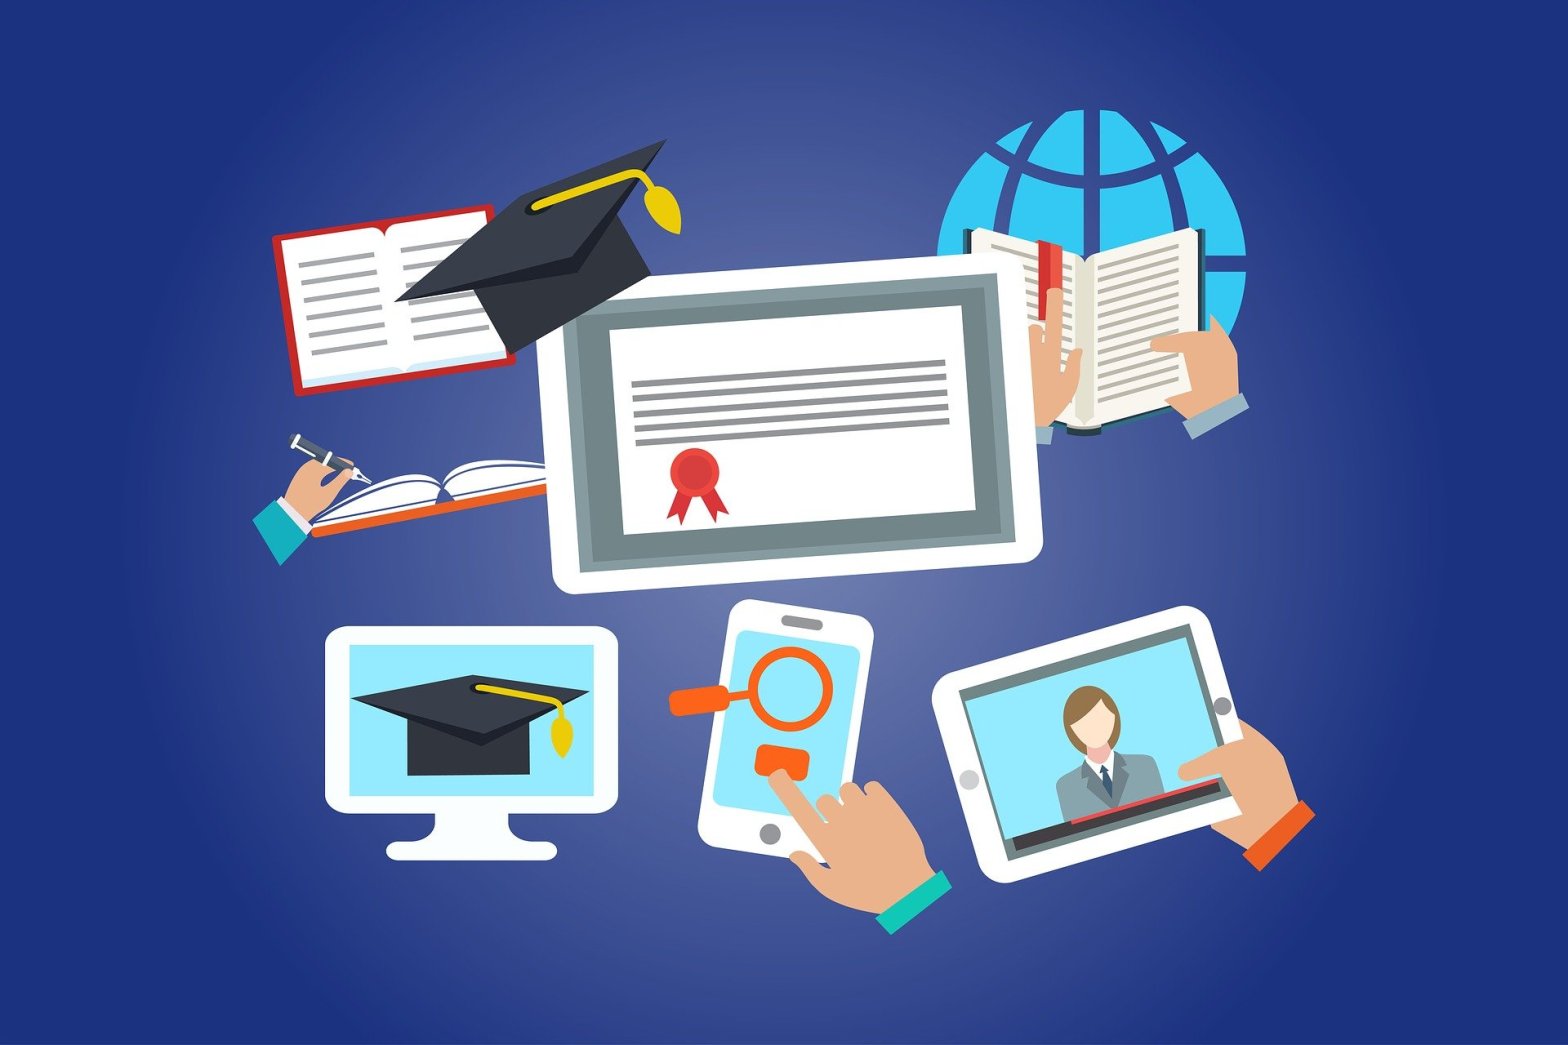 Online teaching and learning represented by books, mobile devices, computers, certificates, and graduation caps